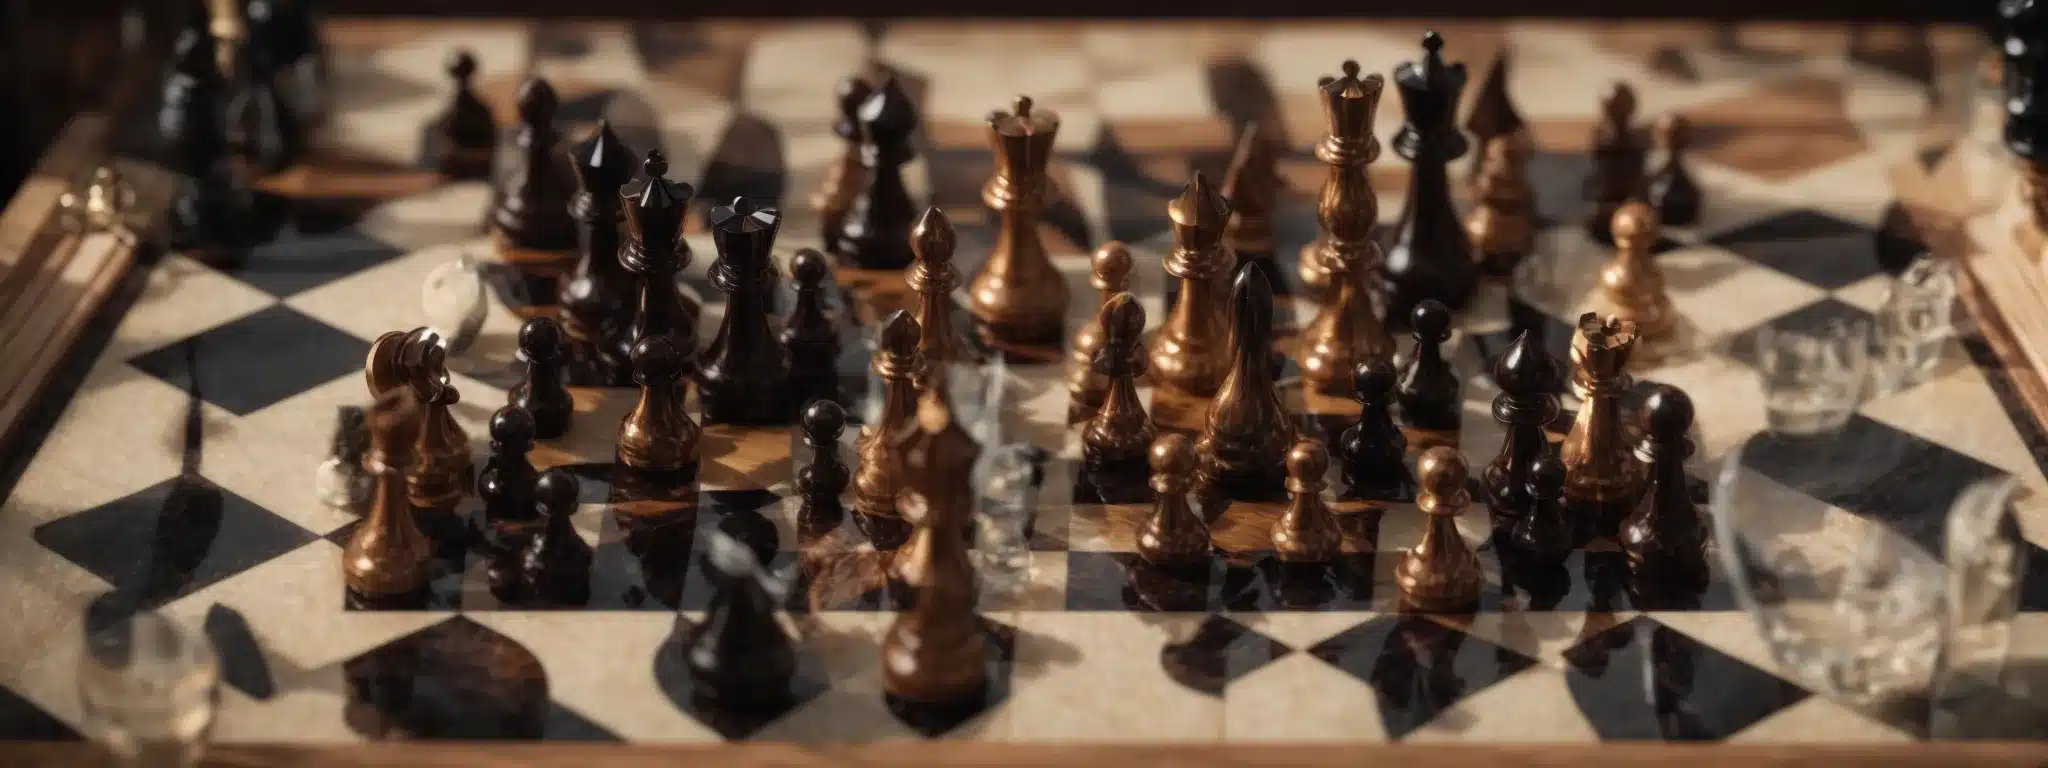 A Chessboard From Above With Distinct Pieces Positioned In A Strategic Formation, Ready For The Next Insightful Move.